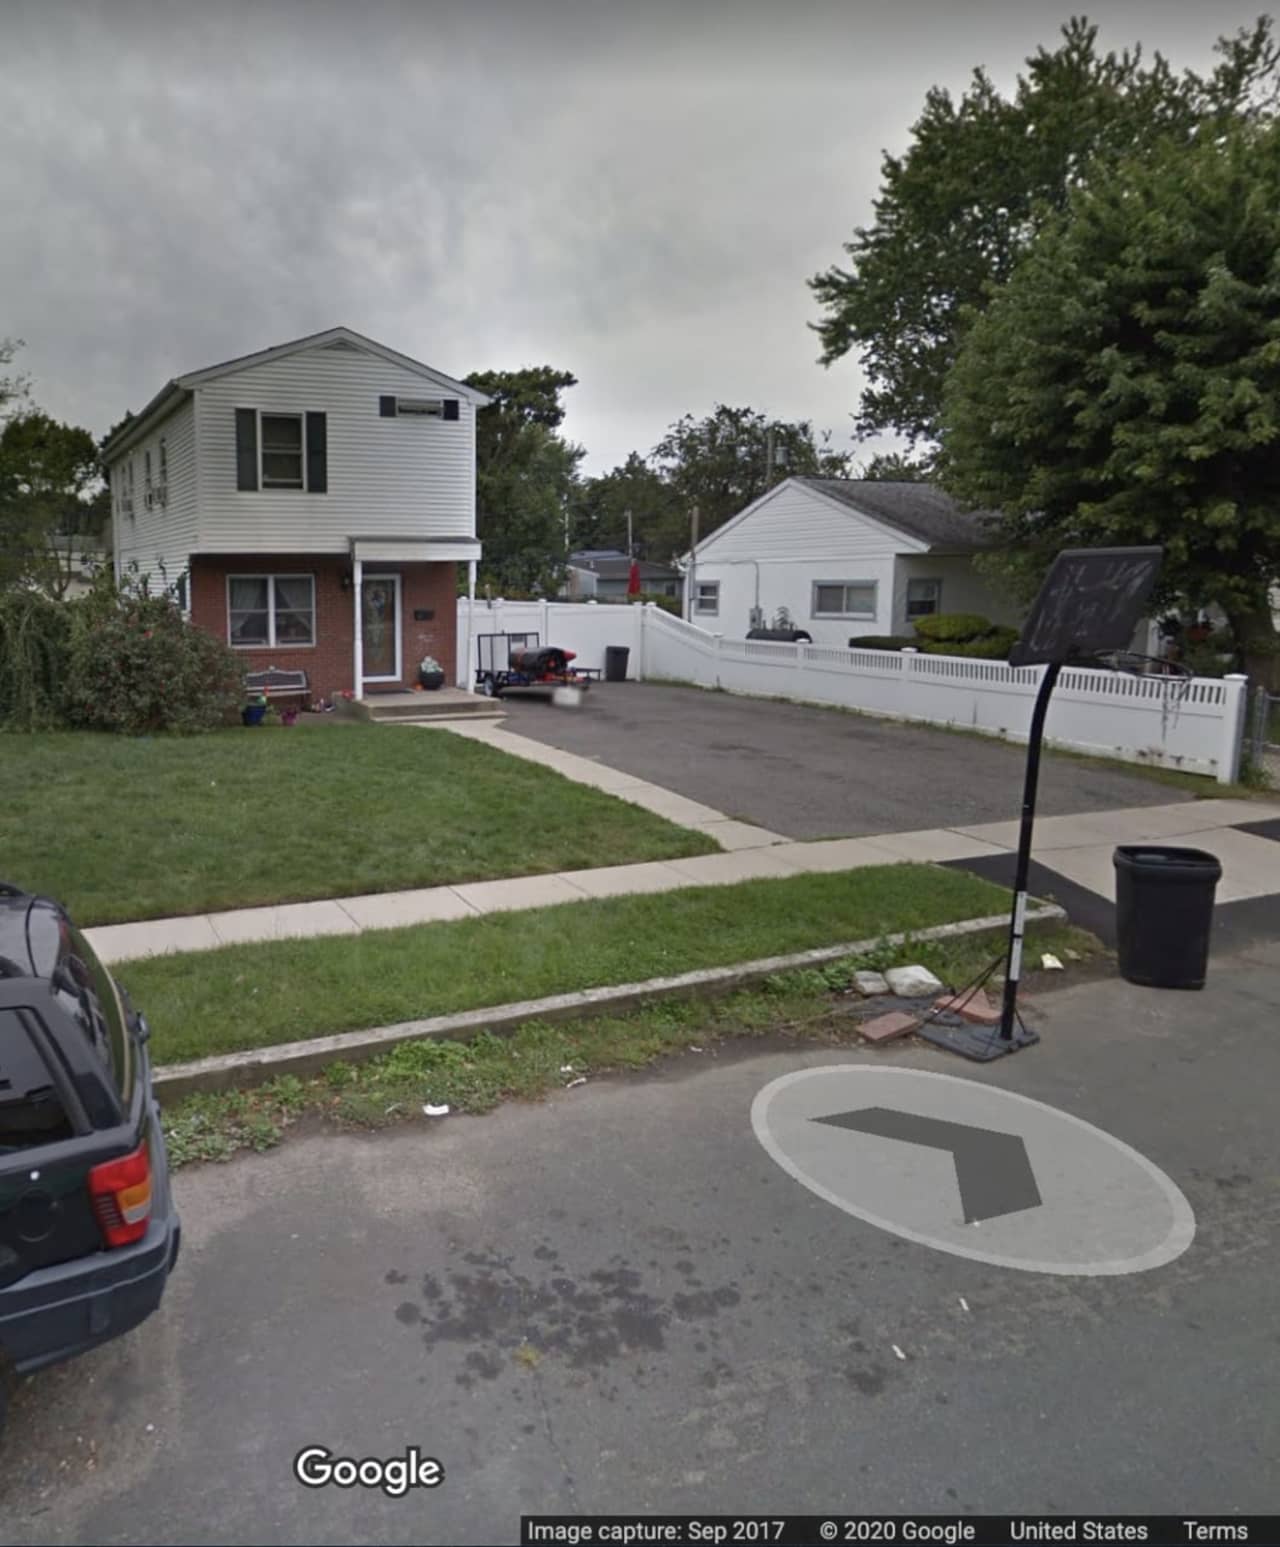 The area of North Somerset Road in Amityville where the shooting happened.